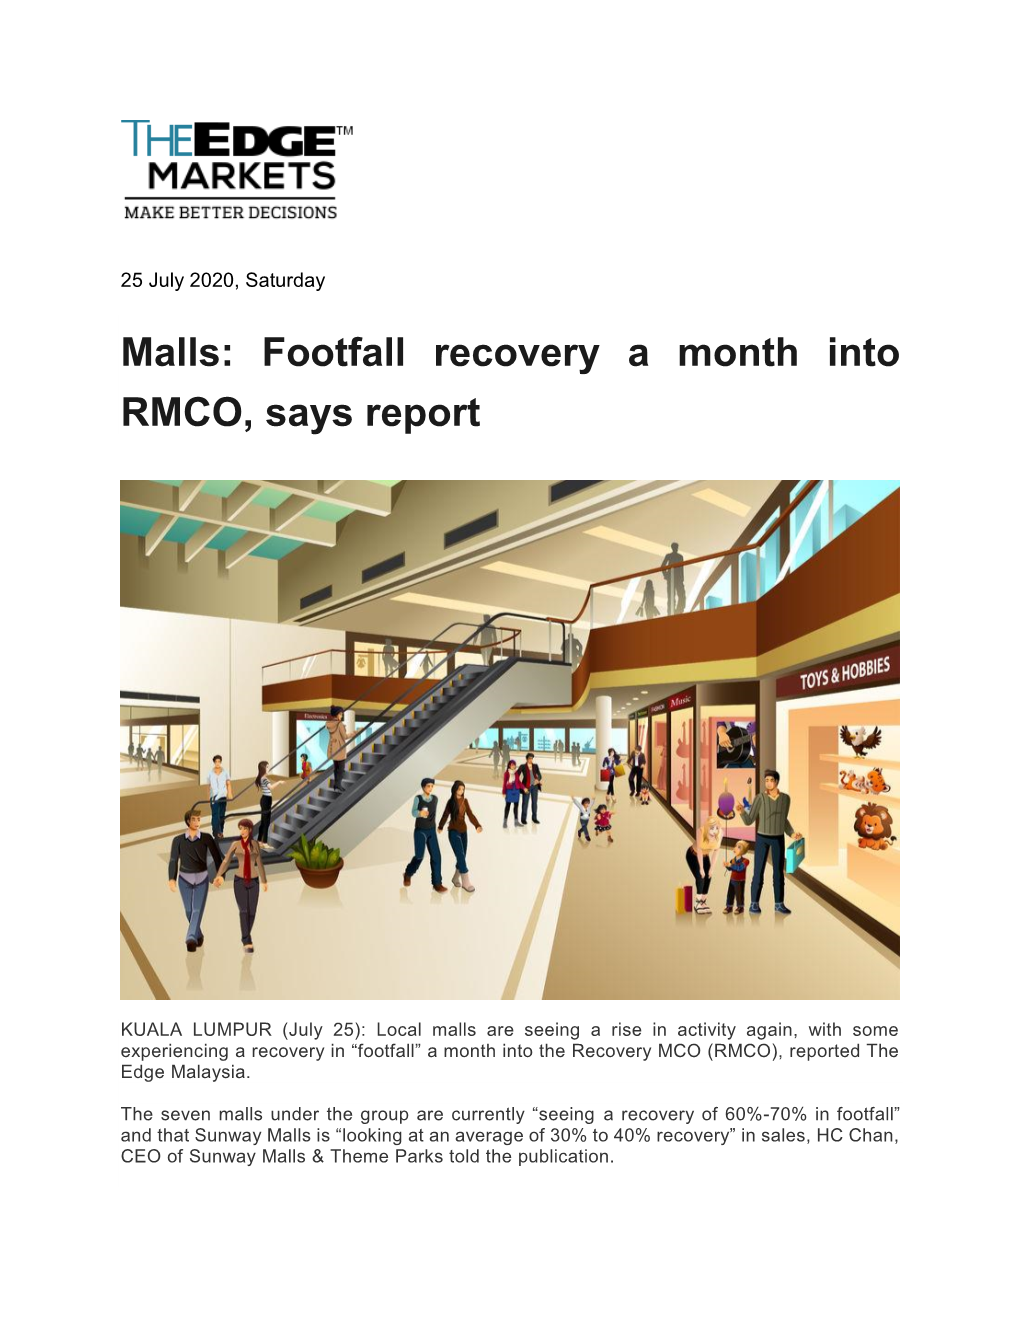 Malls: Footfall Recovery a Month Into RMCO, Says Report